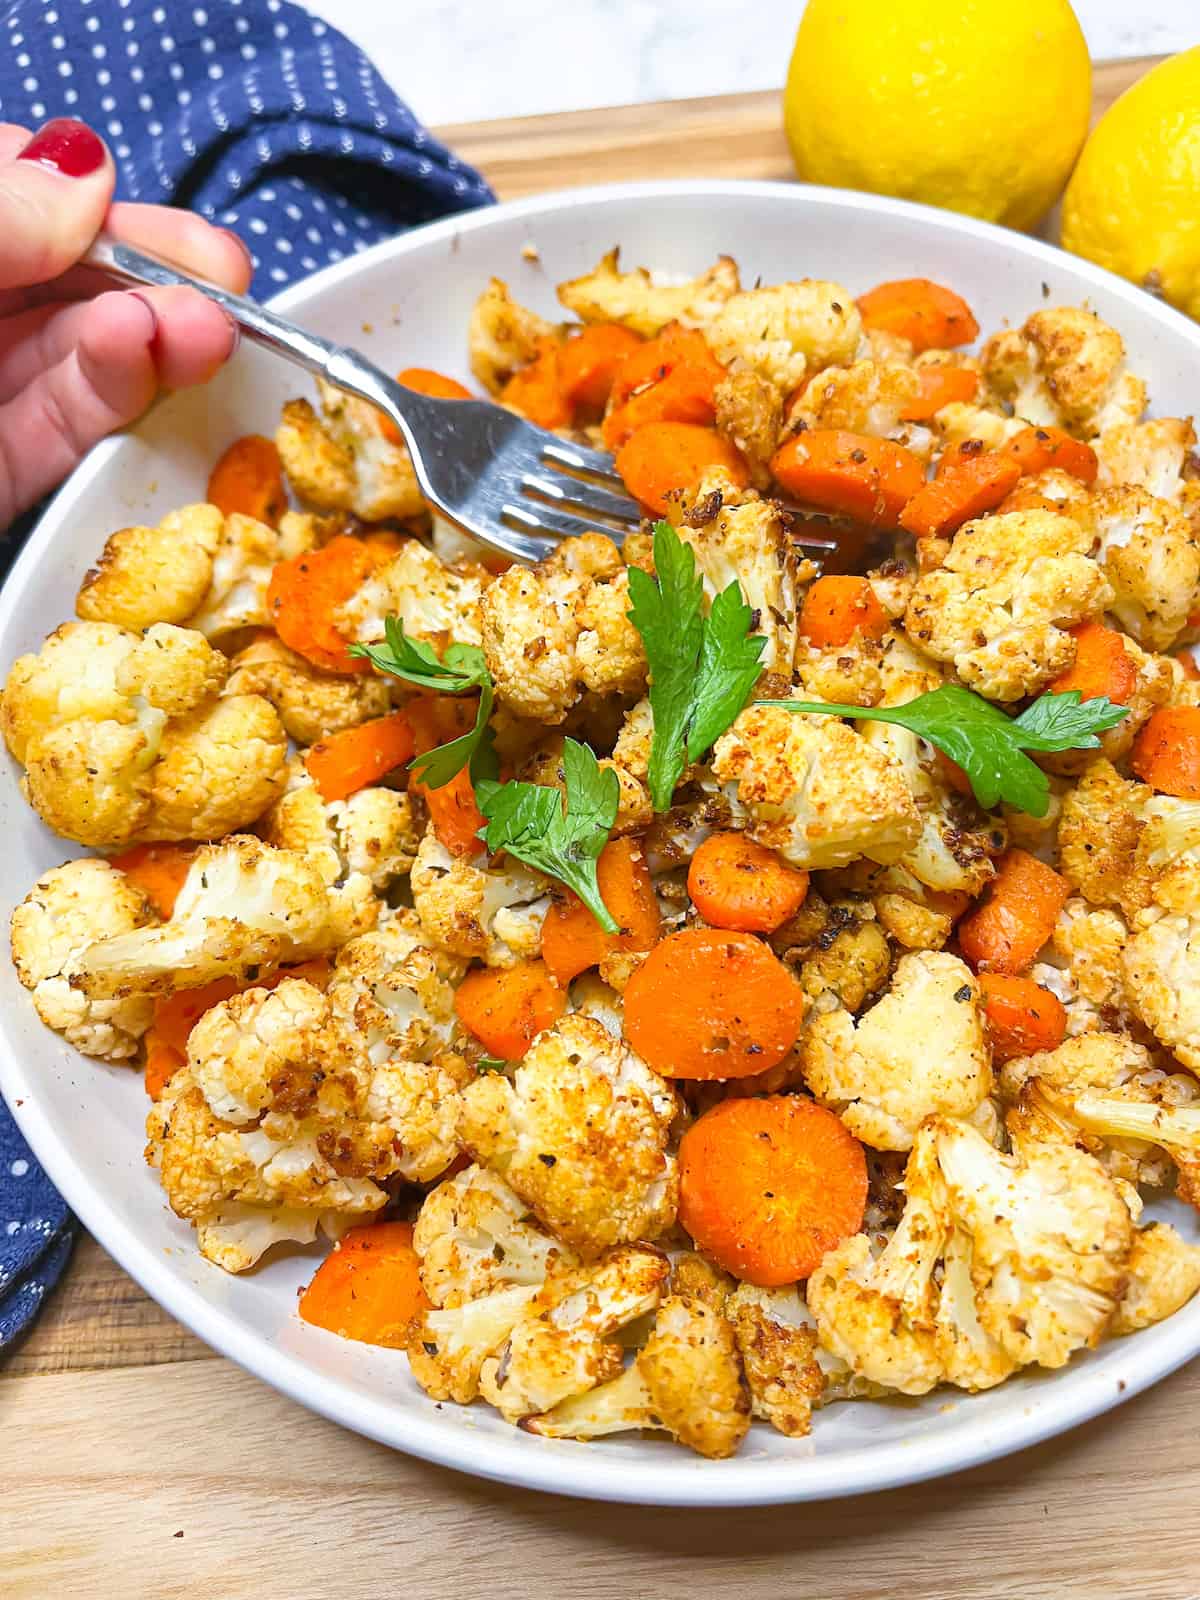 Roasted cauliflower and carrots with parsley and a hand holding a fork